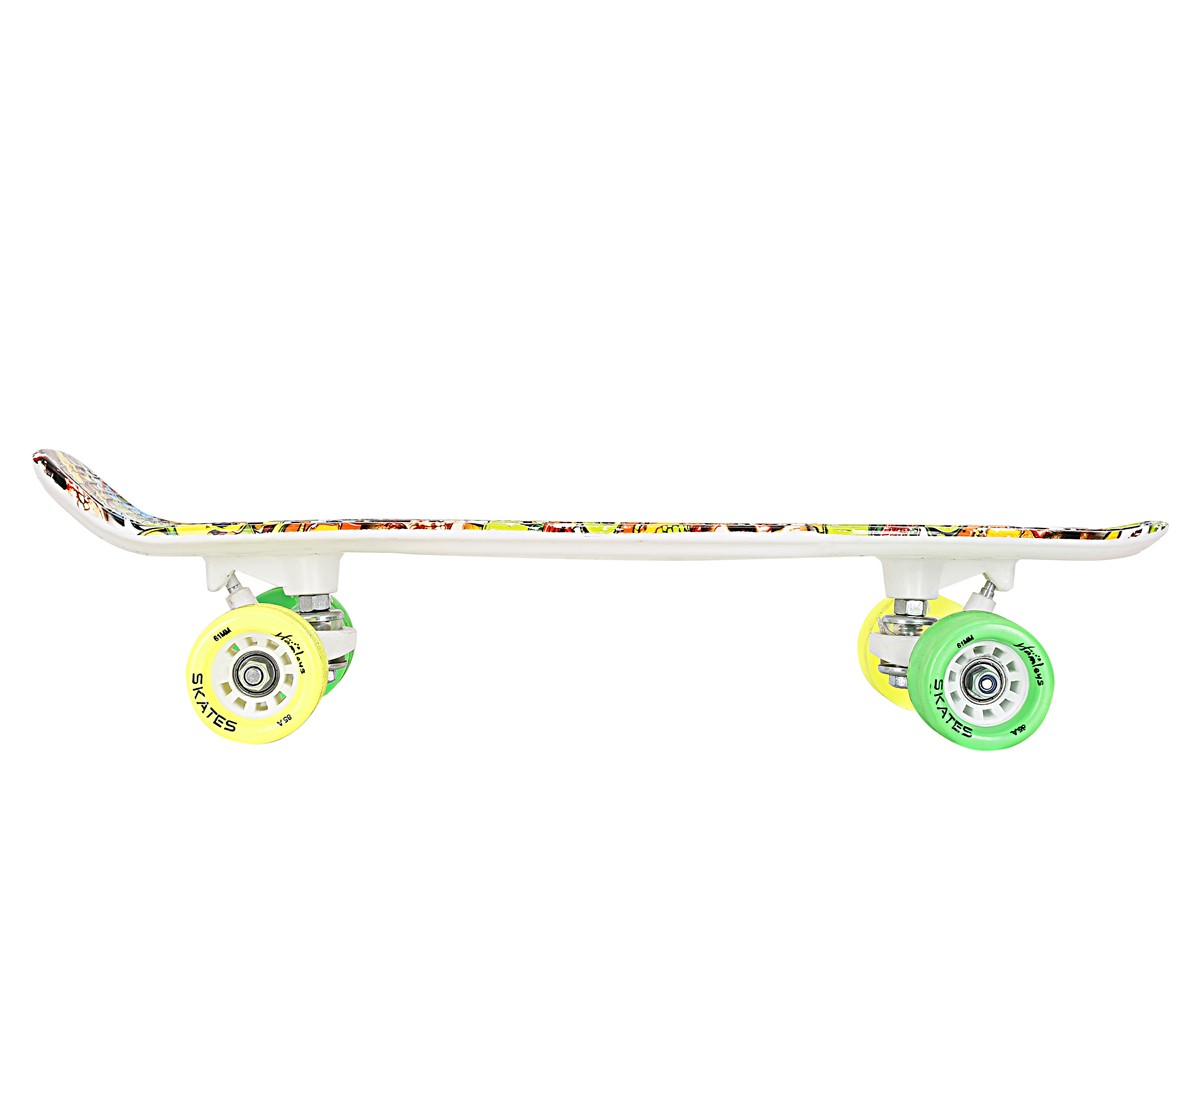 Hamleys Penny Skate Board for kids 7Y+, Yellow and Blue